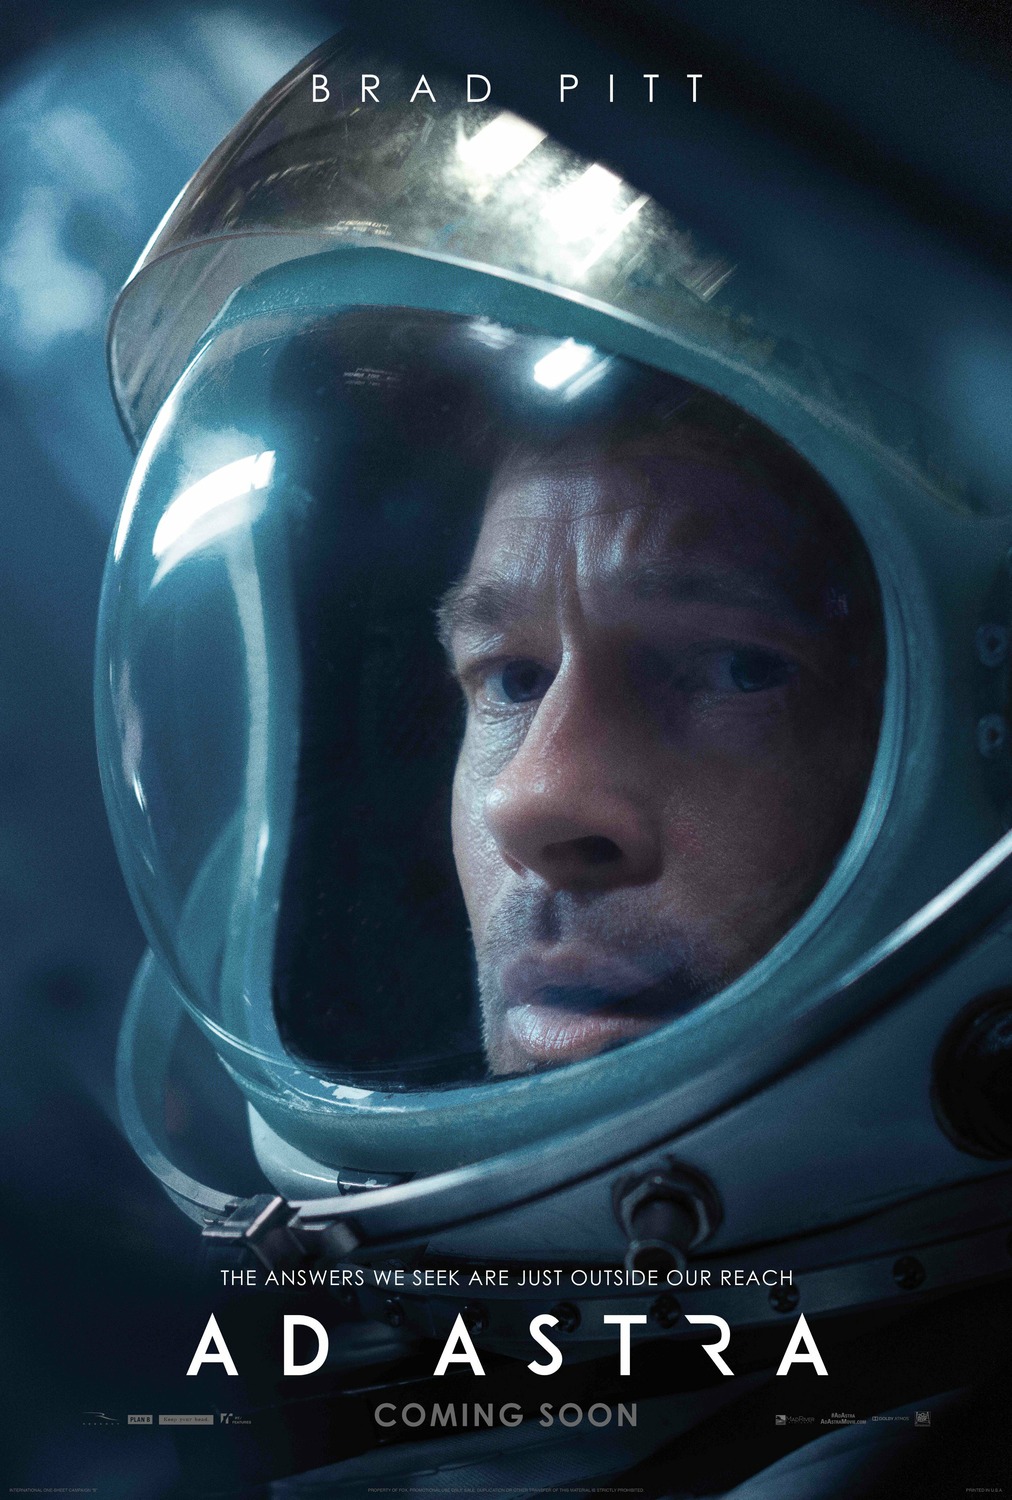 Ad Astra film review: a magnificent spectacle in space